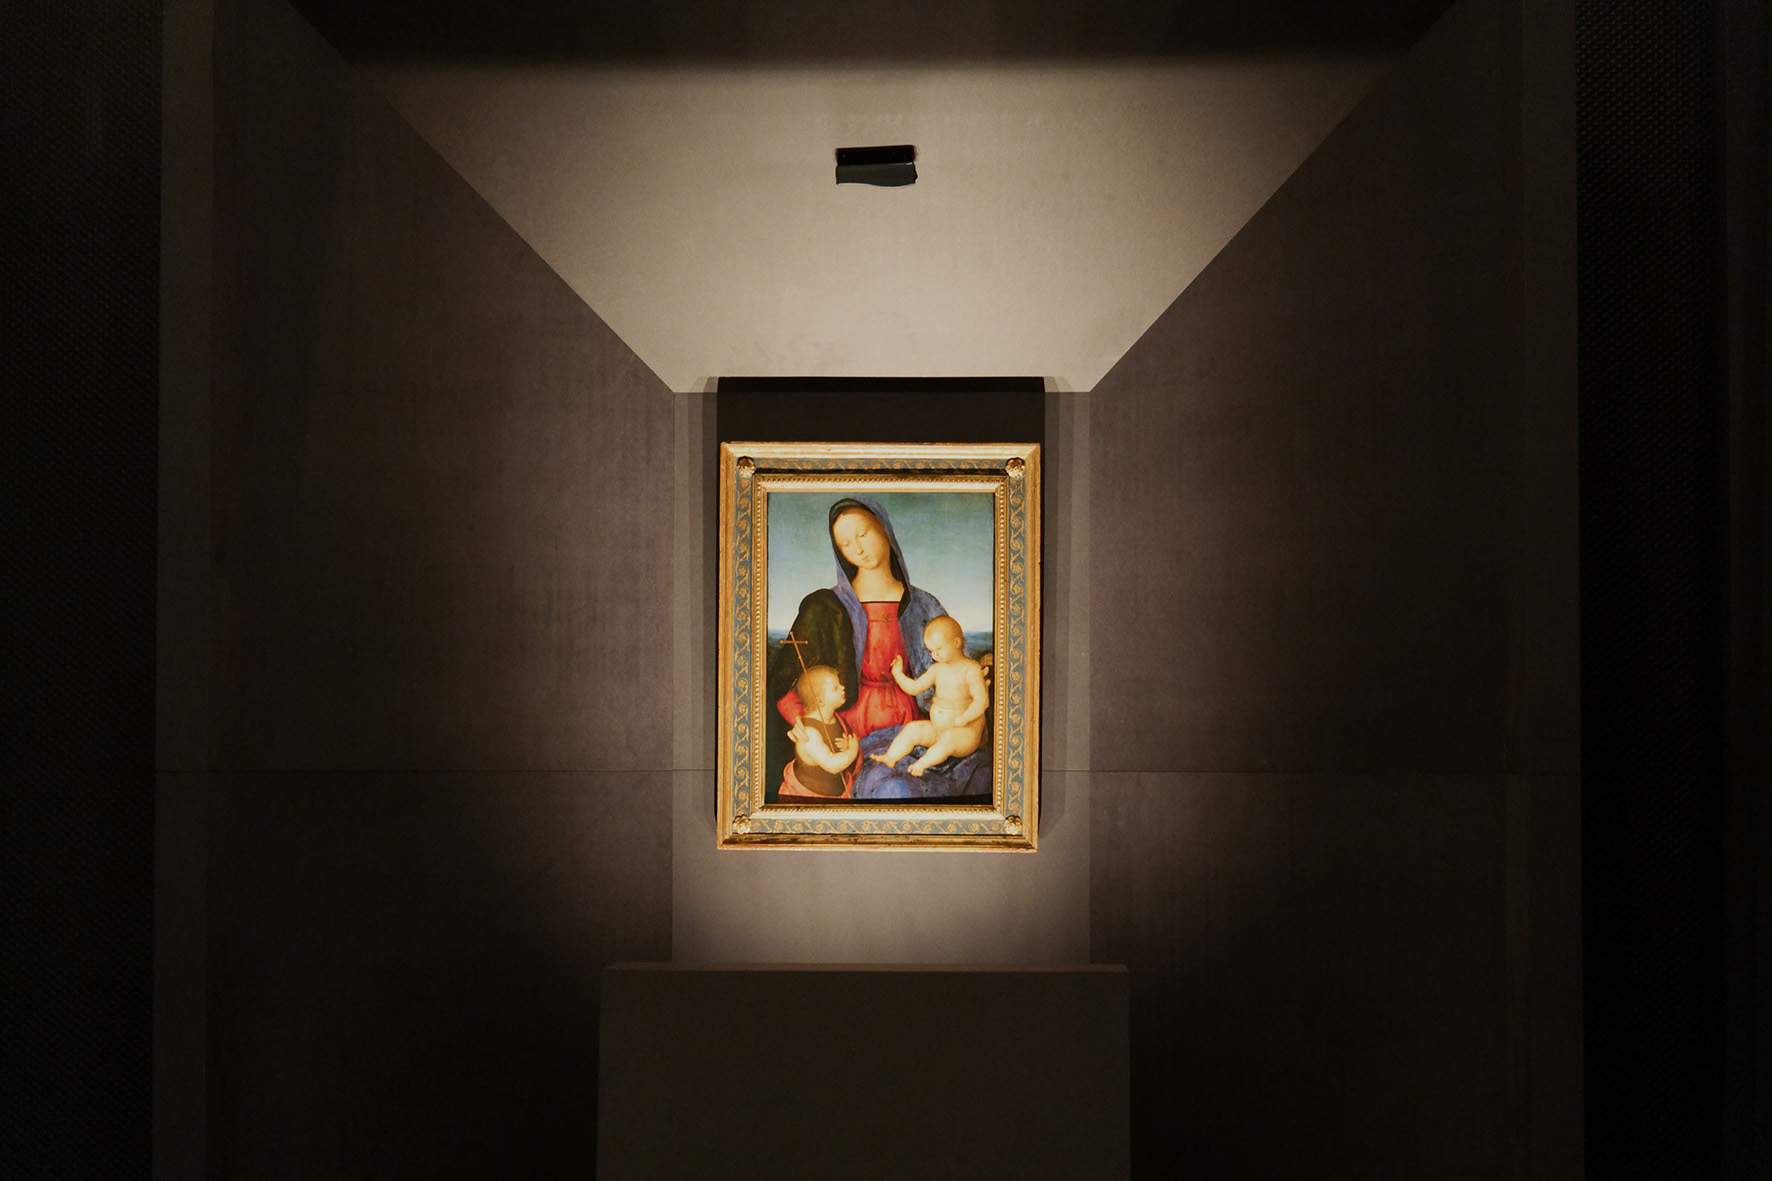 The Diotallevi Madonna, an early masterpiece by Raphael, on display in Rimini at the City Museum